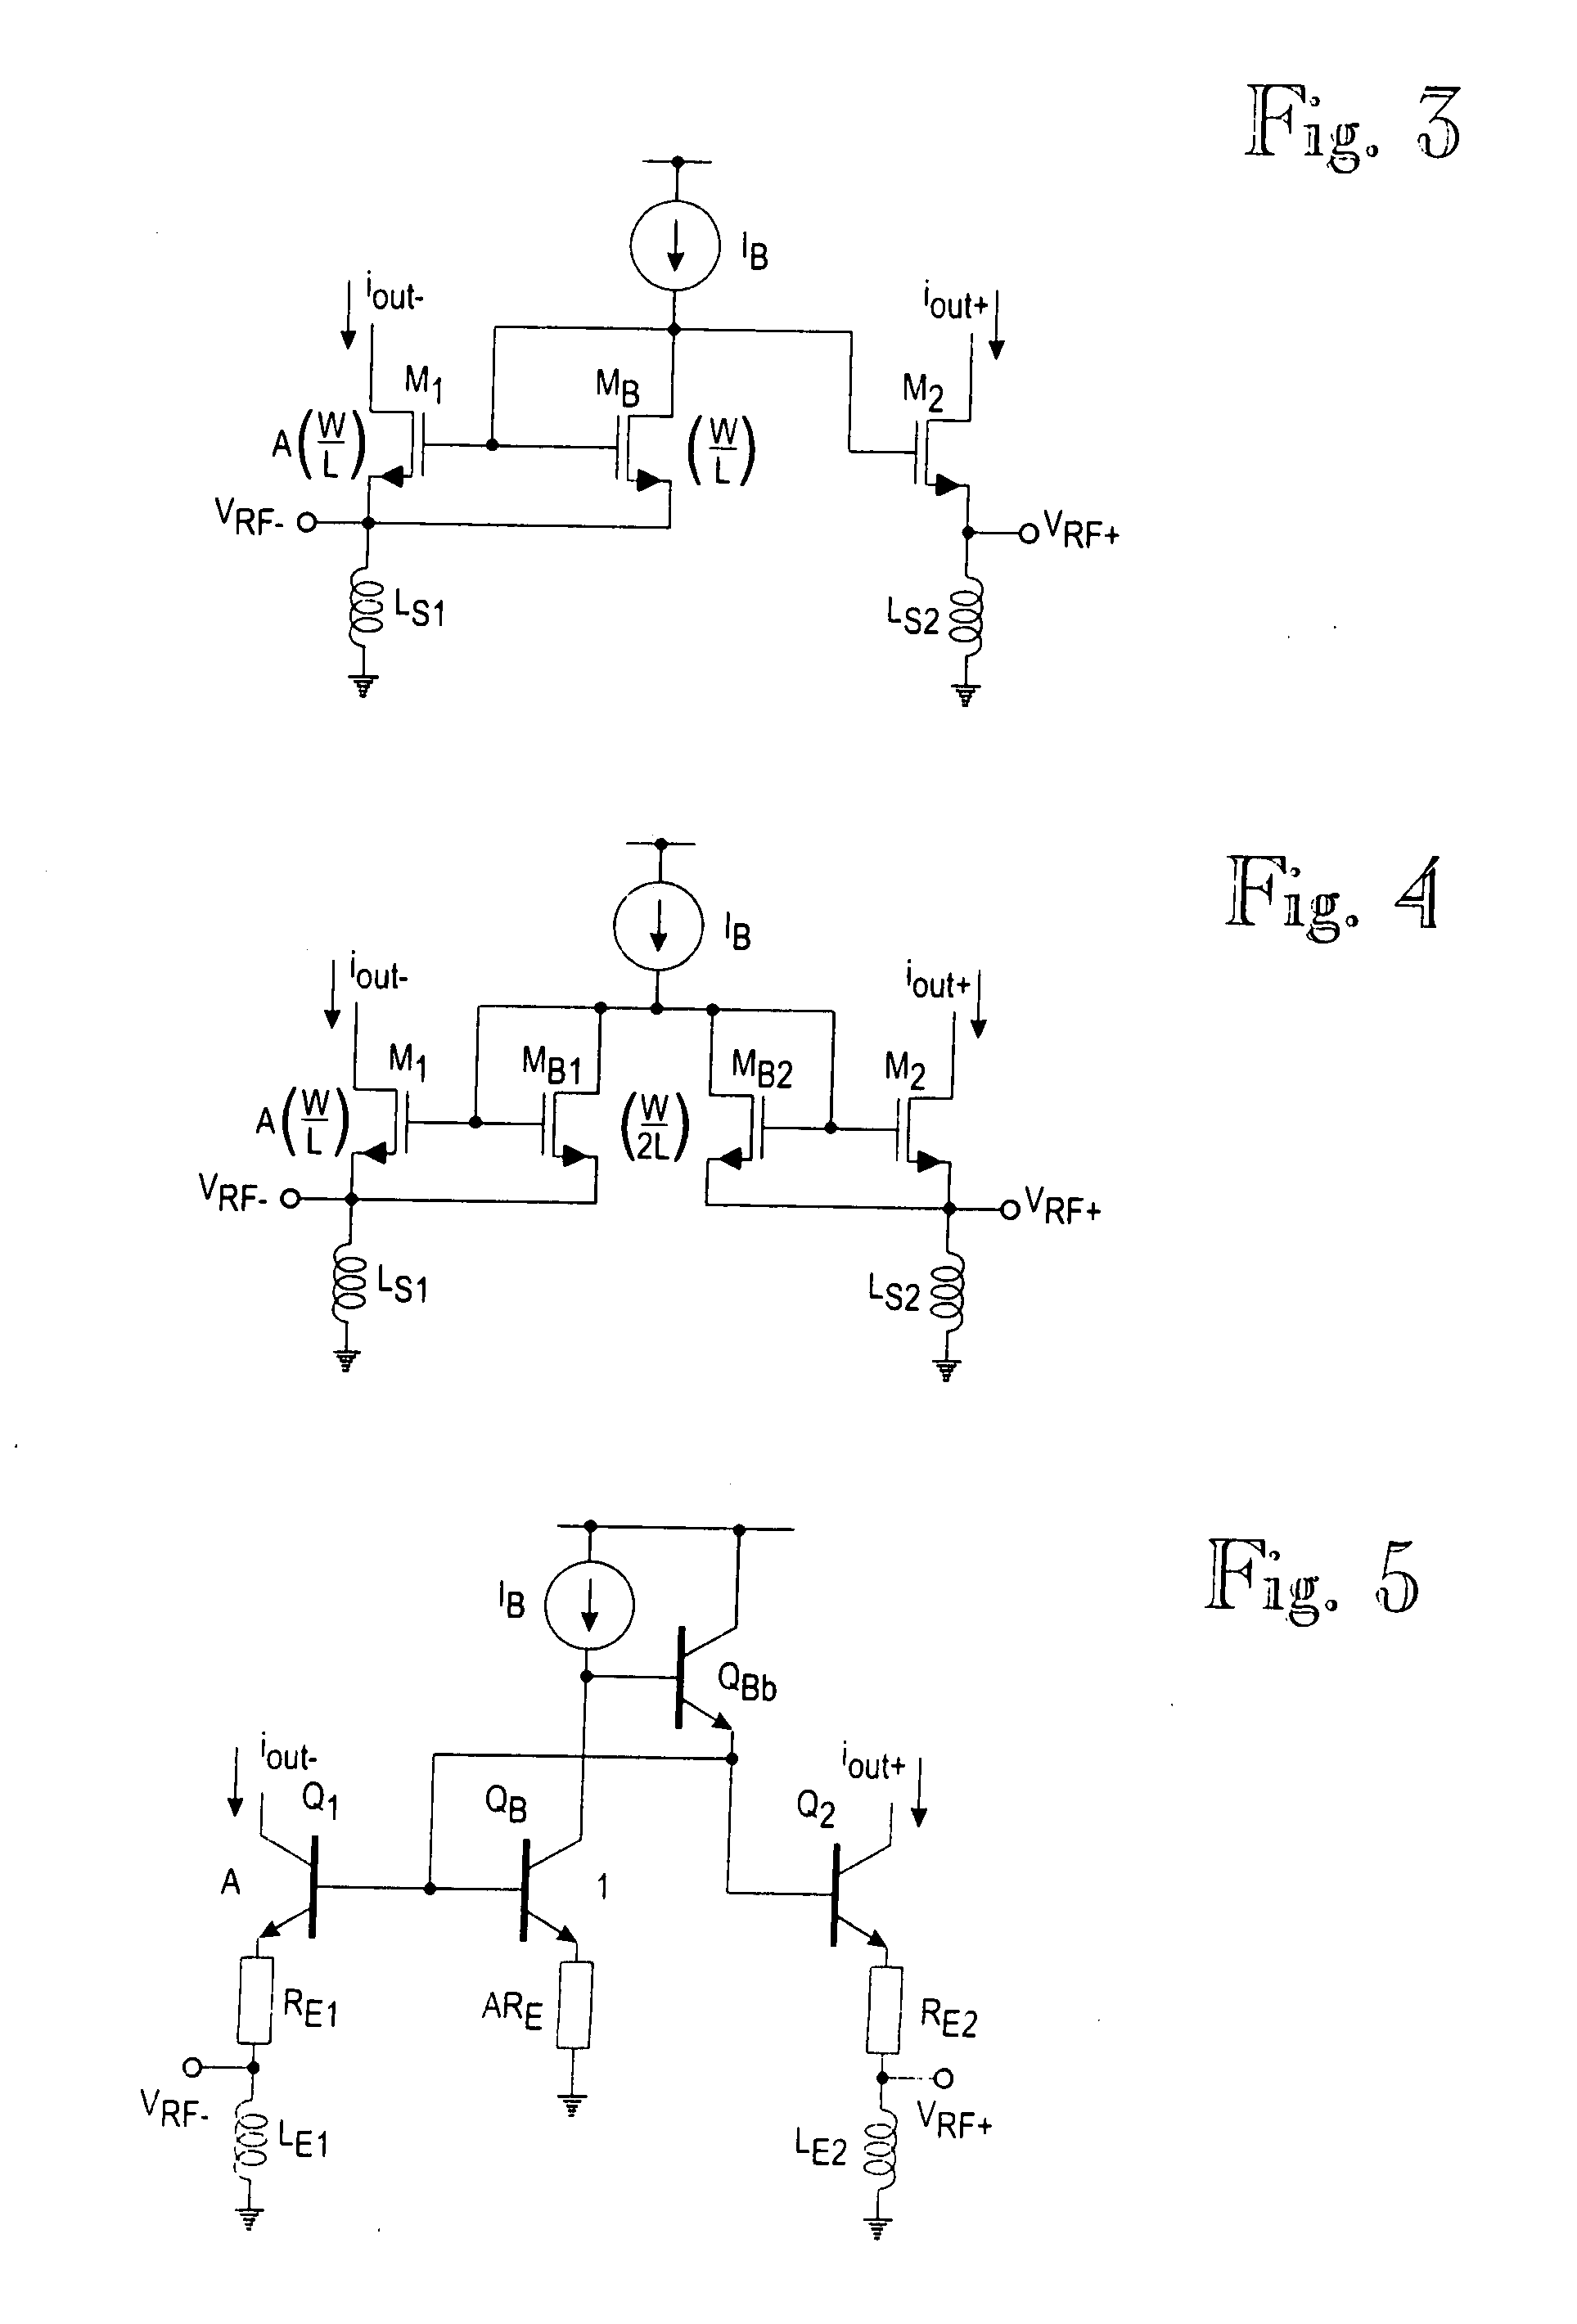 RF input transconductor stage